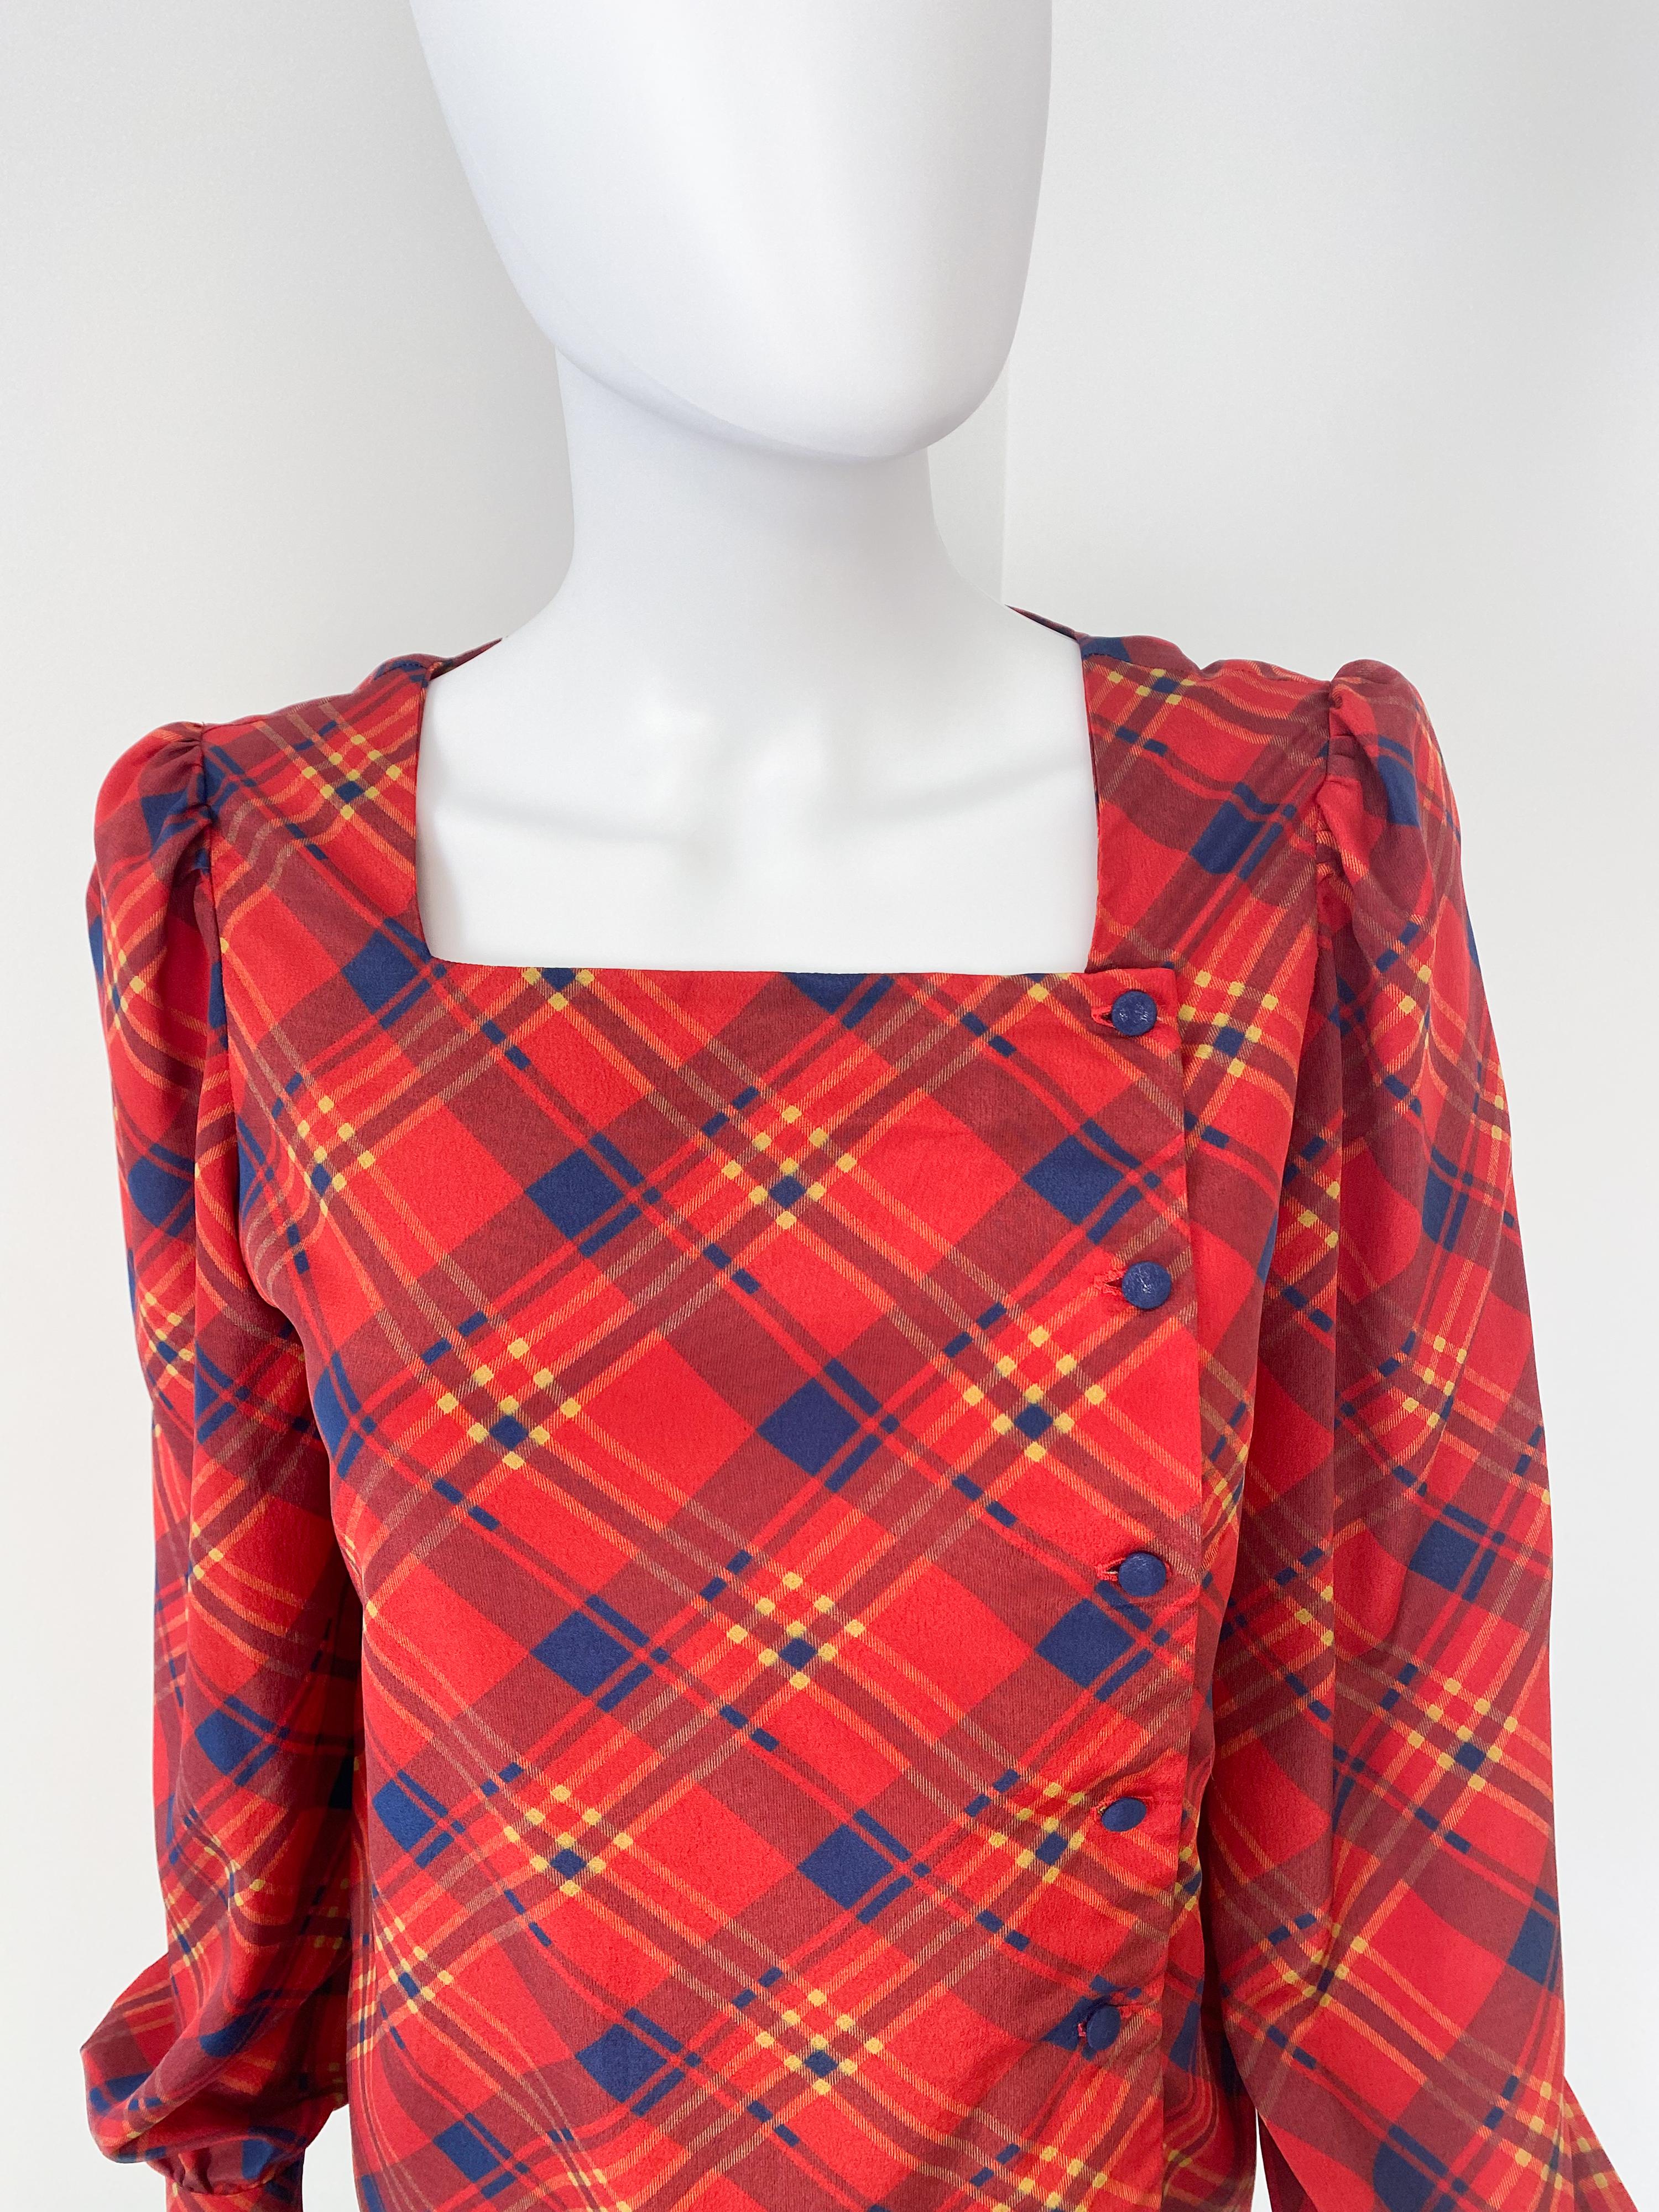 Vintage 1980s Silky Polyester Blouse Top Red and Blue Tartan Size 6/8 For Sale 1